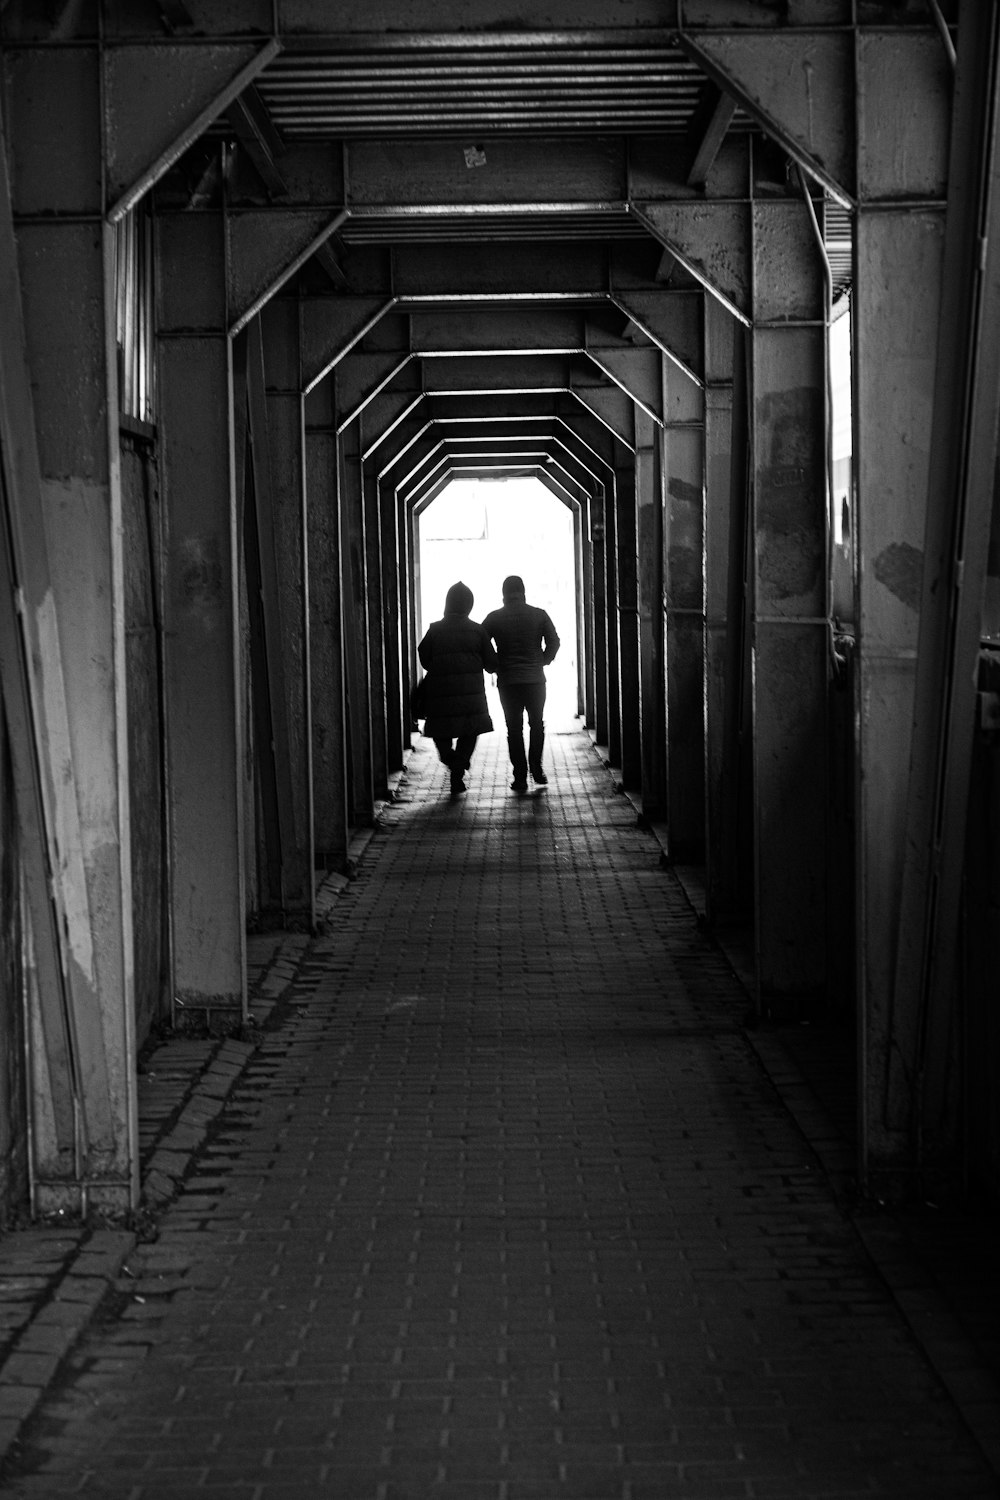 a man and woman walking down a hallway